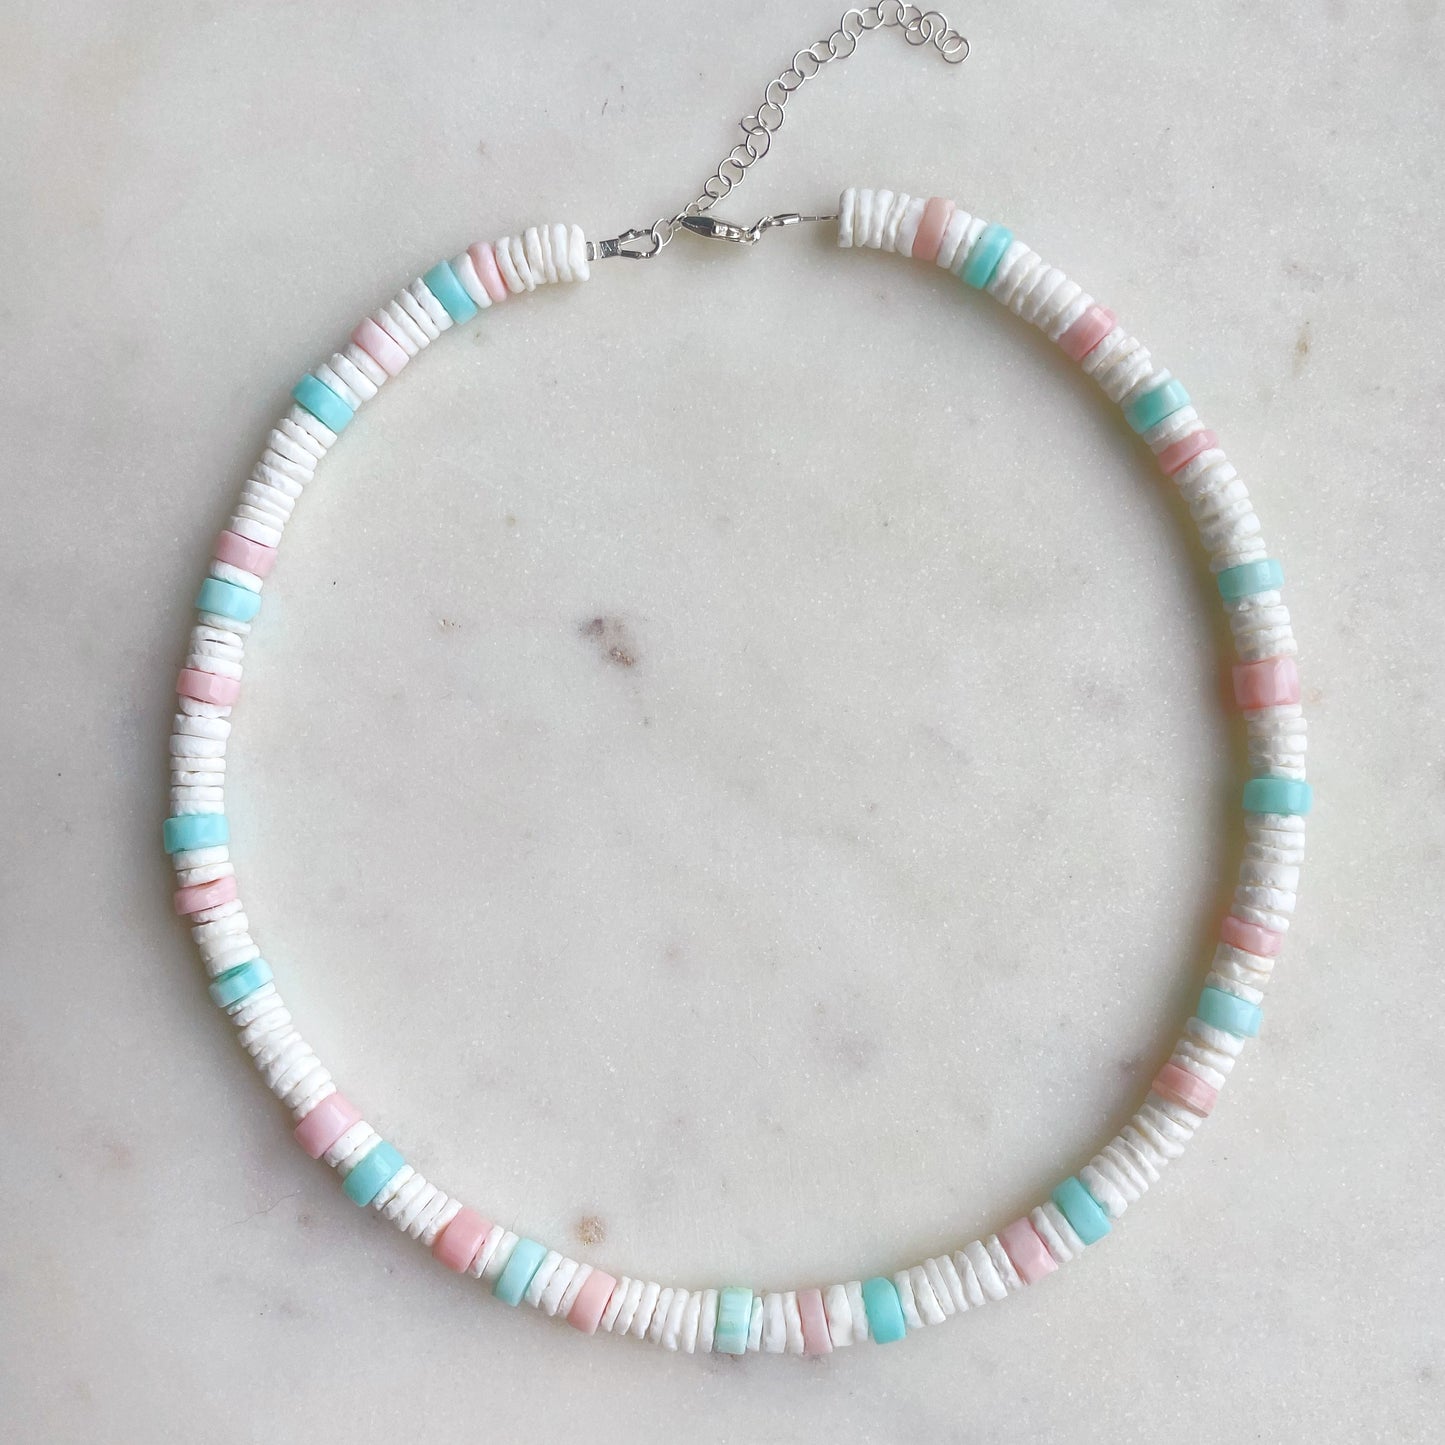 Cotton Candy necklace